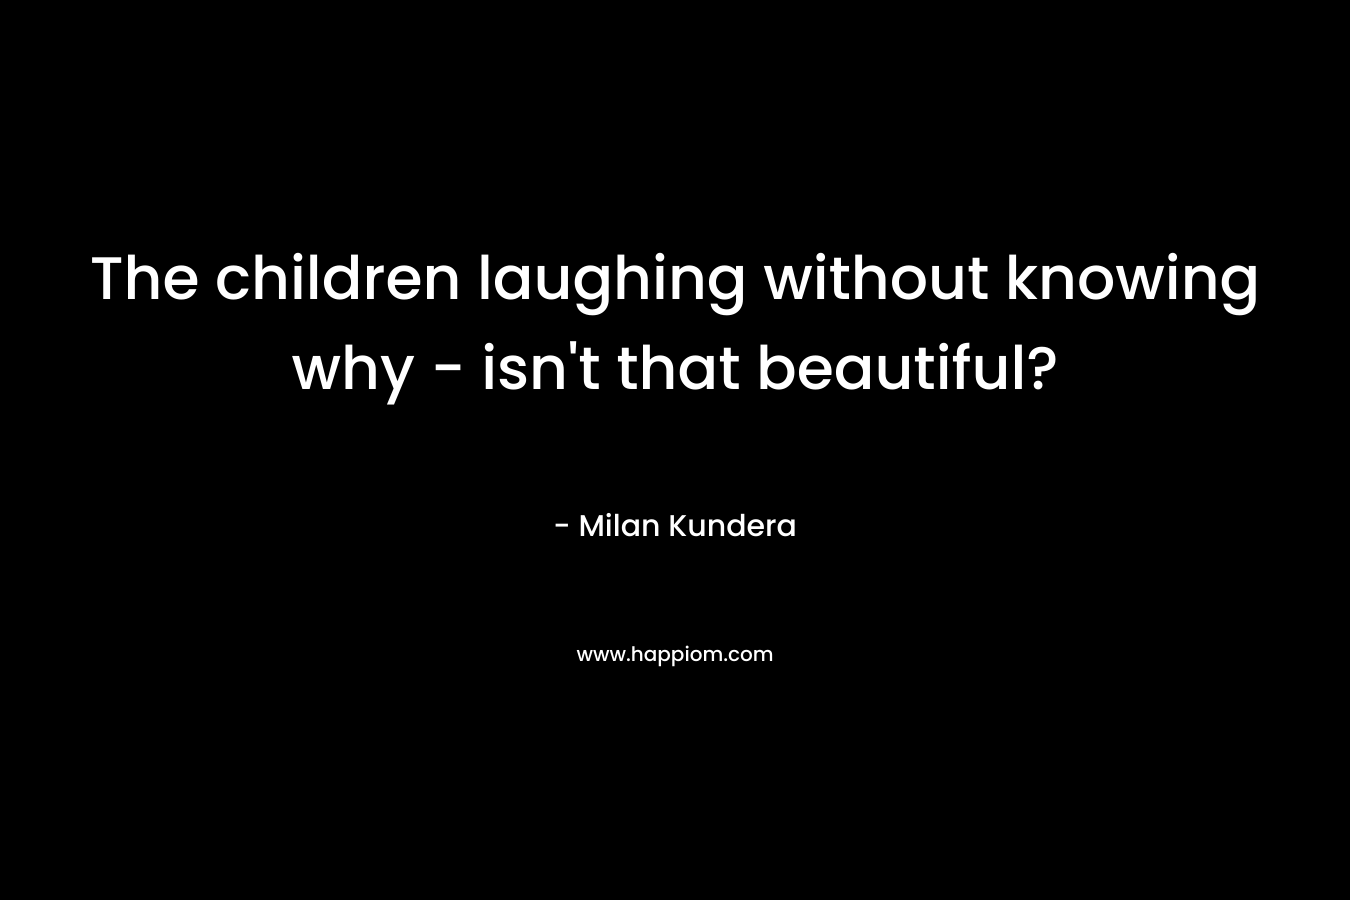 The children laughing without knowing why – isn’t that beautiful? – Milan Kundera